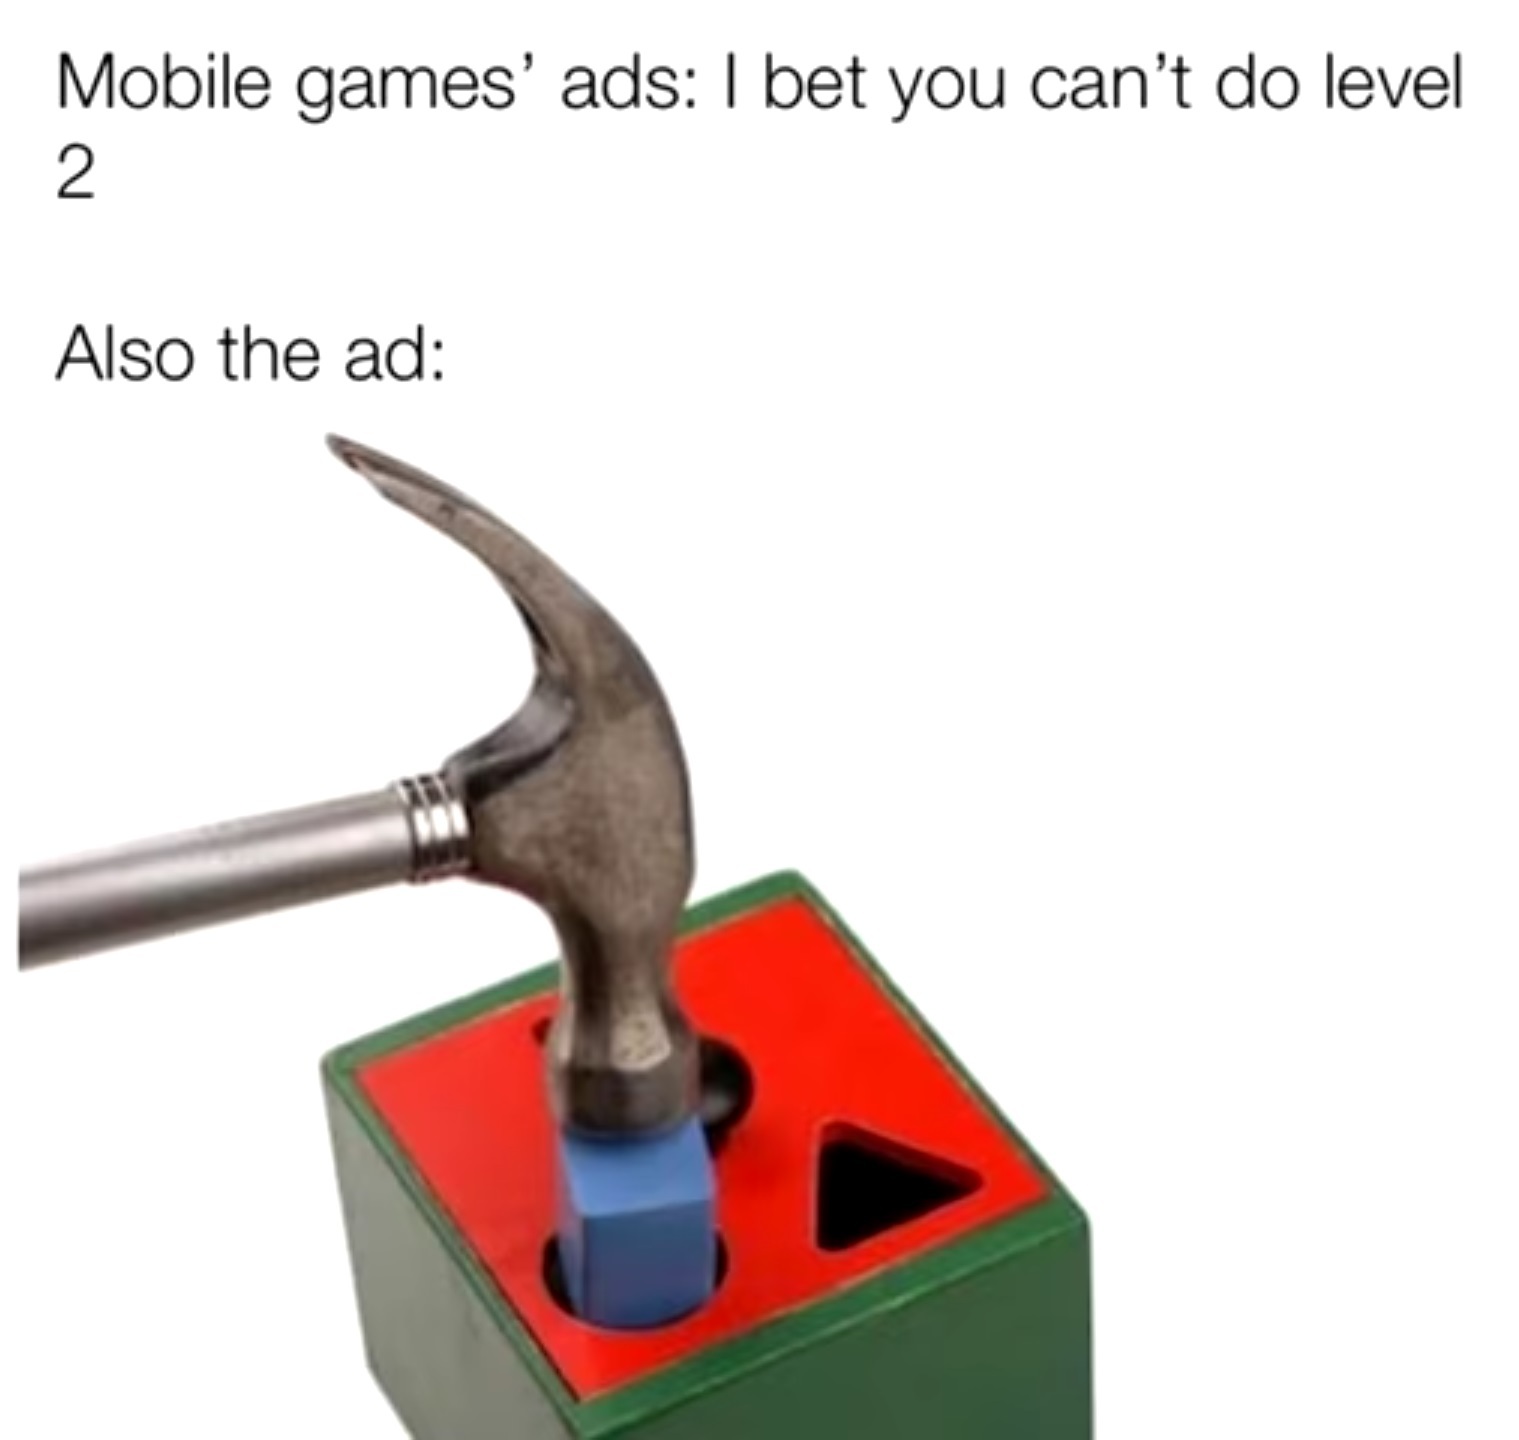 dongs in an ad - meme